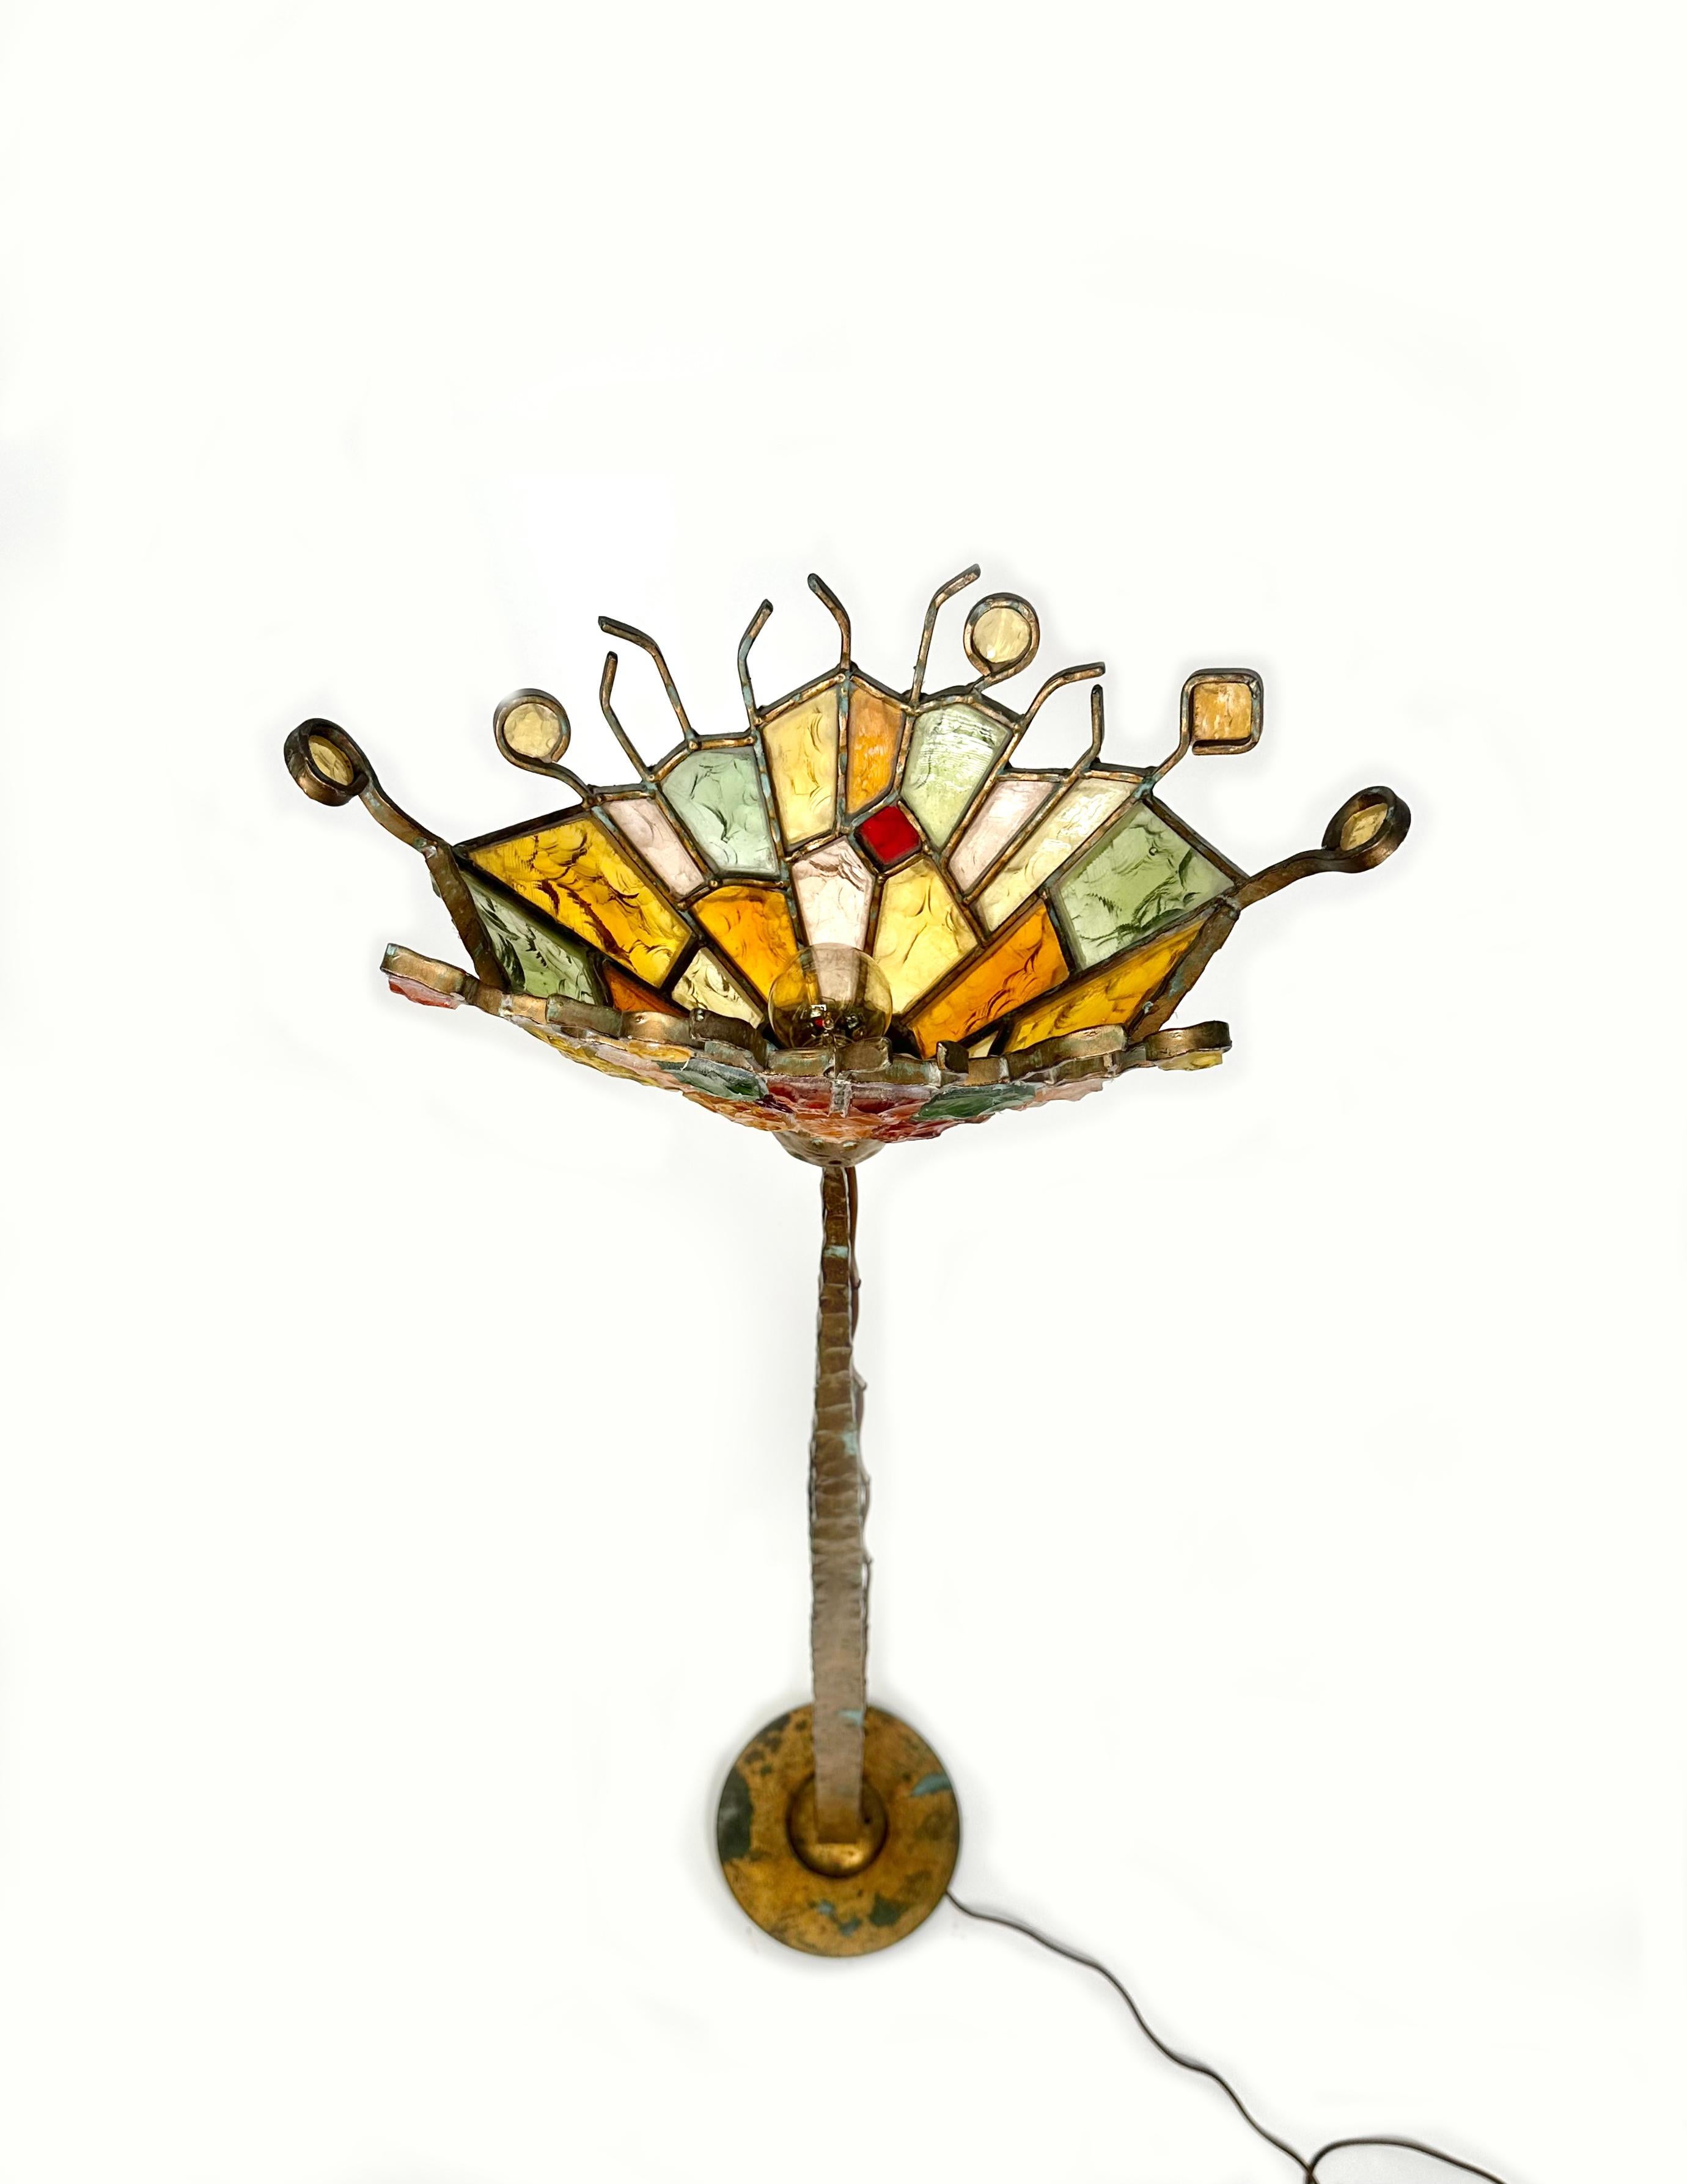 Brutalist Iron and Art Glass Floor Lamp Albano Poli for Poliarte, Italy 1970s For Sale 4